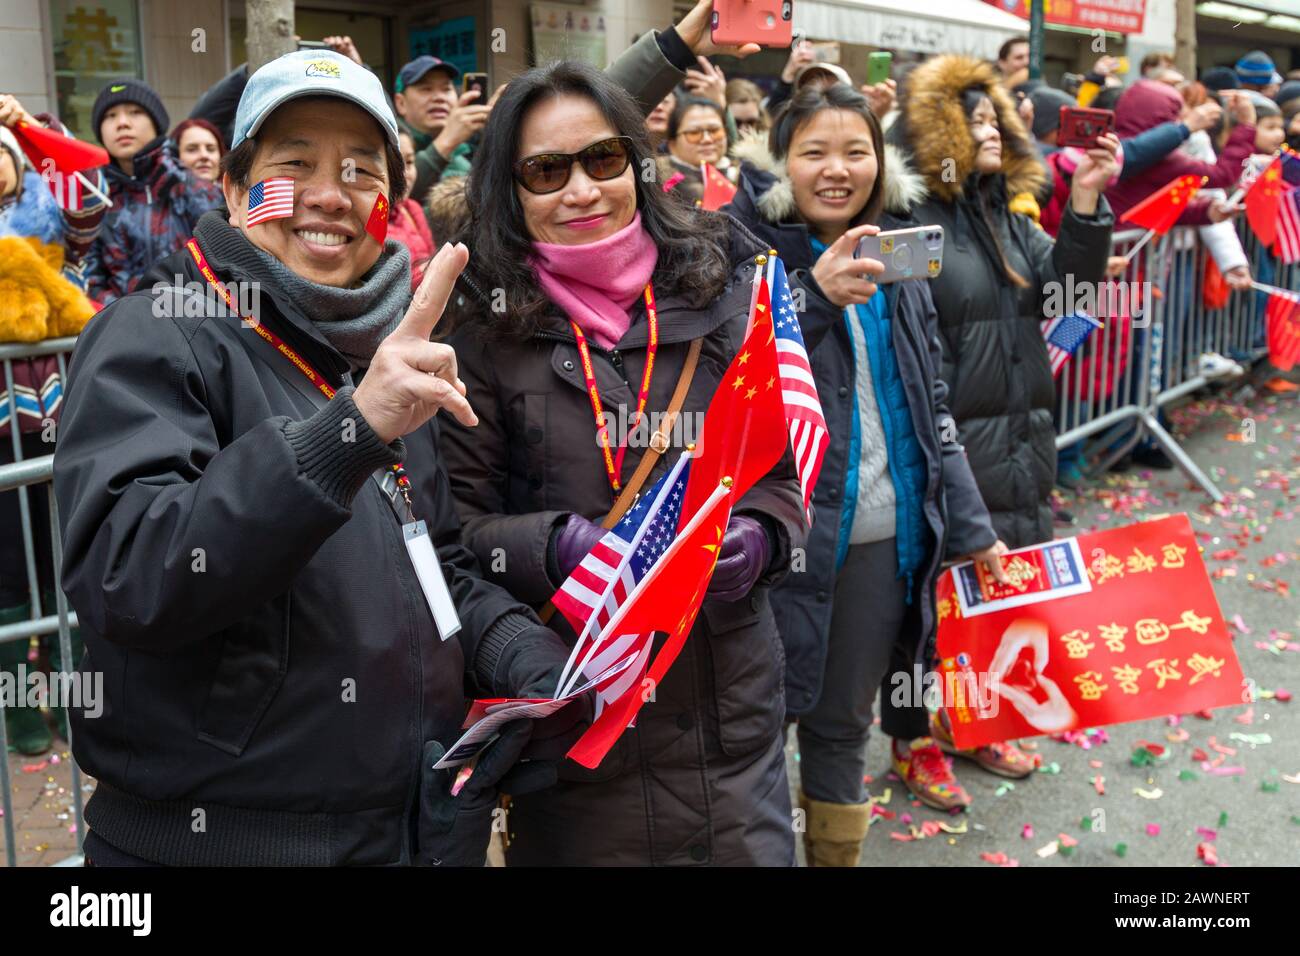 New York, USA. 9th Feb, 2020. Participants wear US and Chinese flags as they participate in the Chinese New Year parade in Chinatown. Credit: Enrique Shore/Alamy Live News Stock Photo